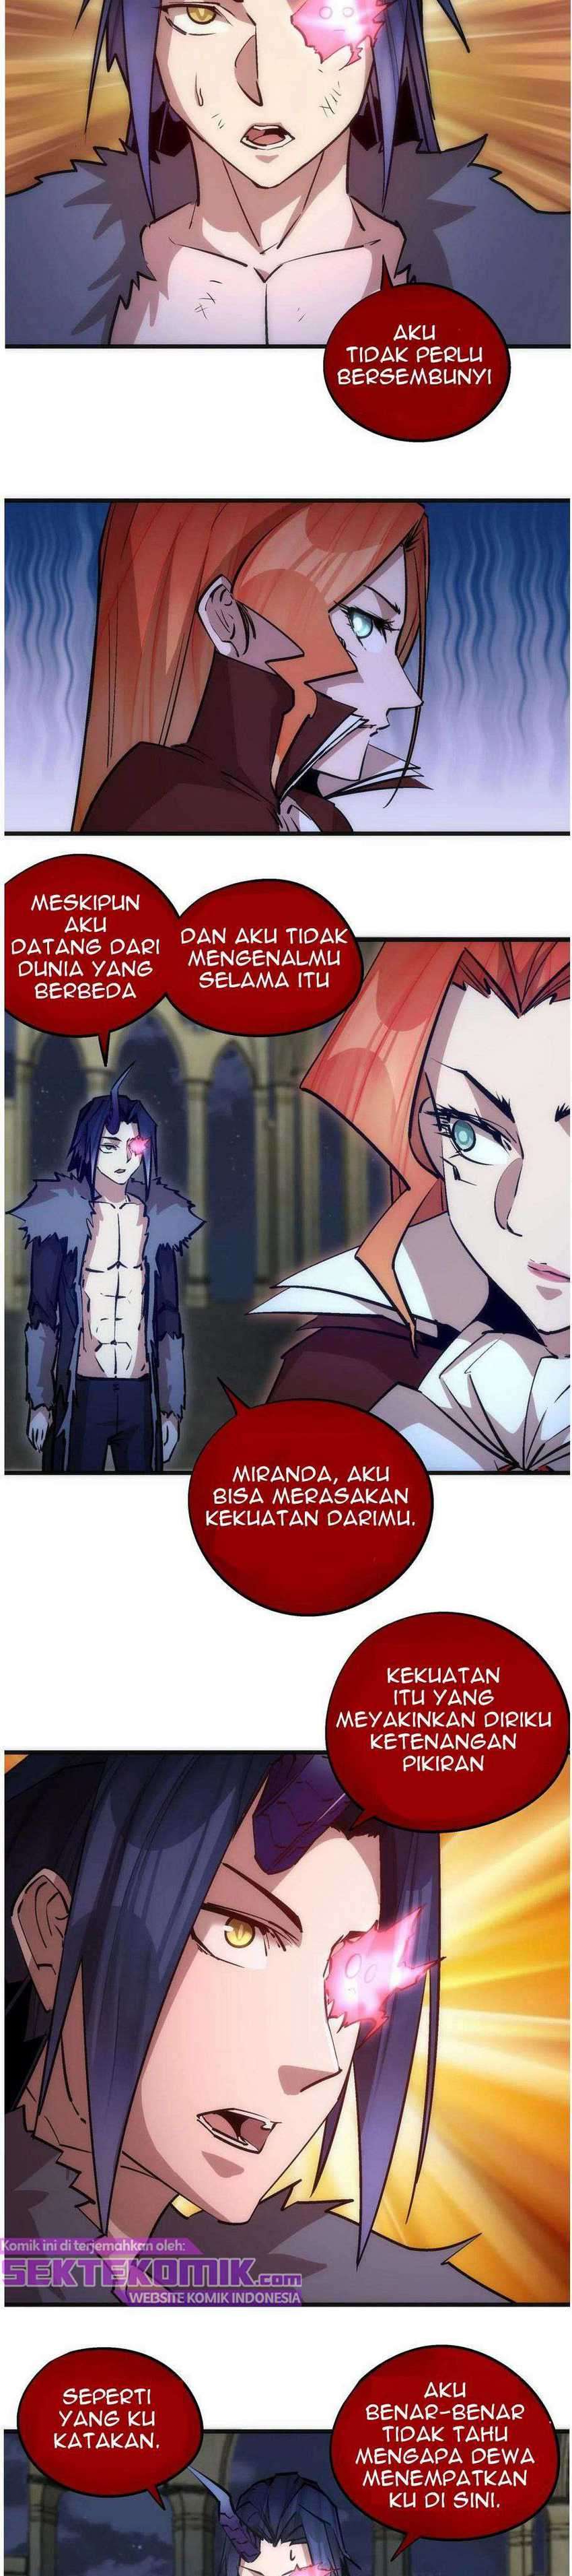 I&#8217;m Not The Overlord Chapter 46